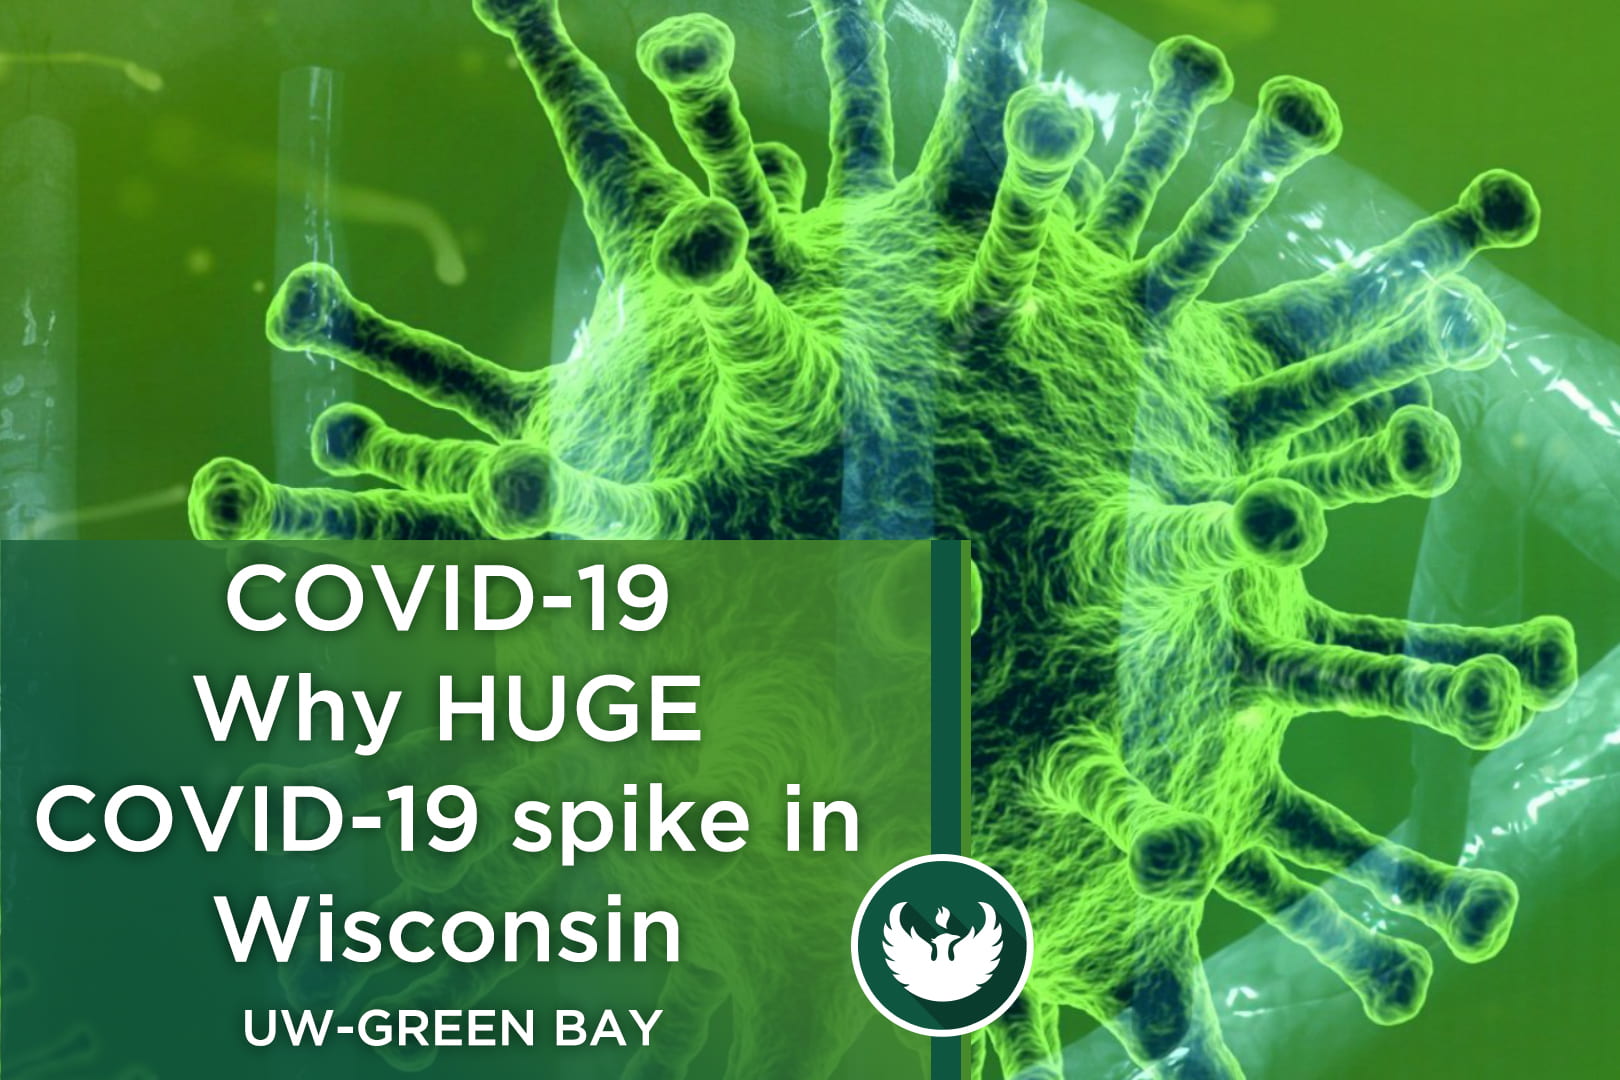 Photo of the Covid-19 virus enlarged under a microscope with the text, "Covid-19 Why Huge Covid-19 spike in Wisconsin.